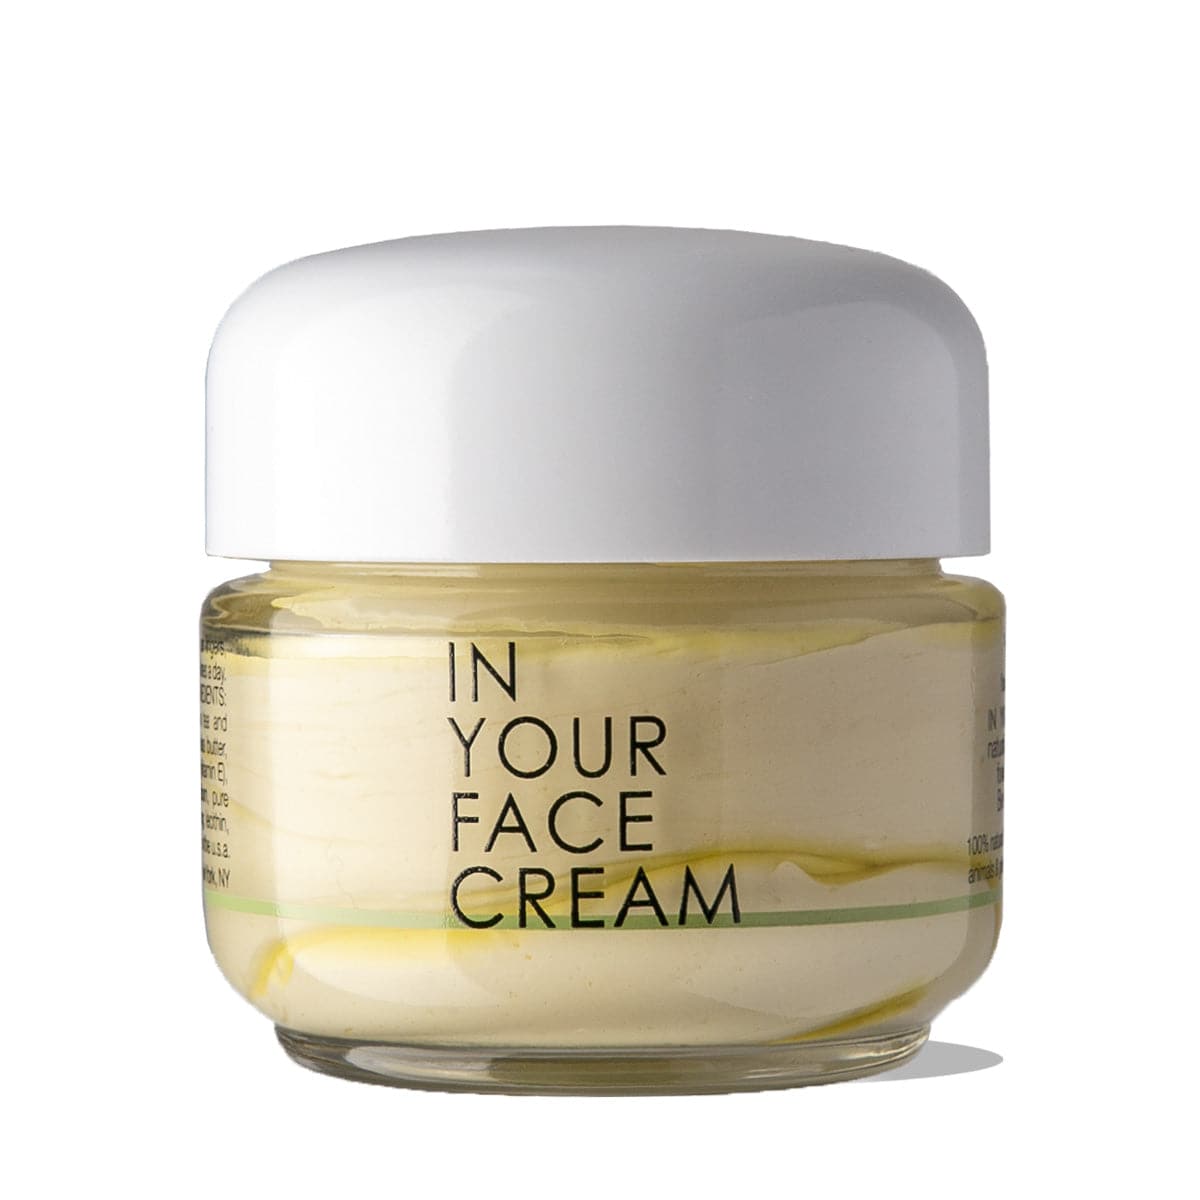 an image of IN YOUR FACE CREAM on a white background